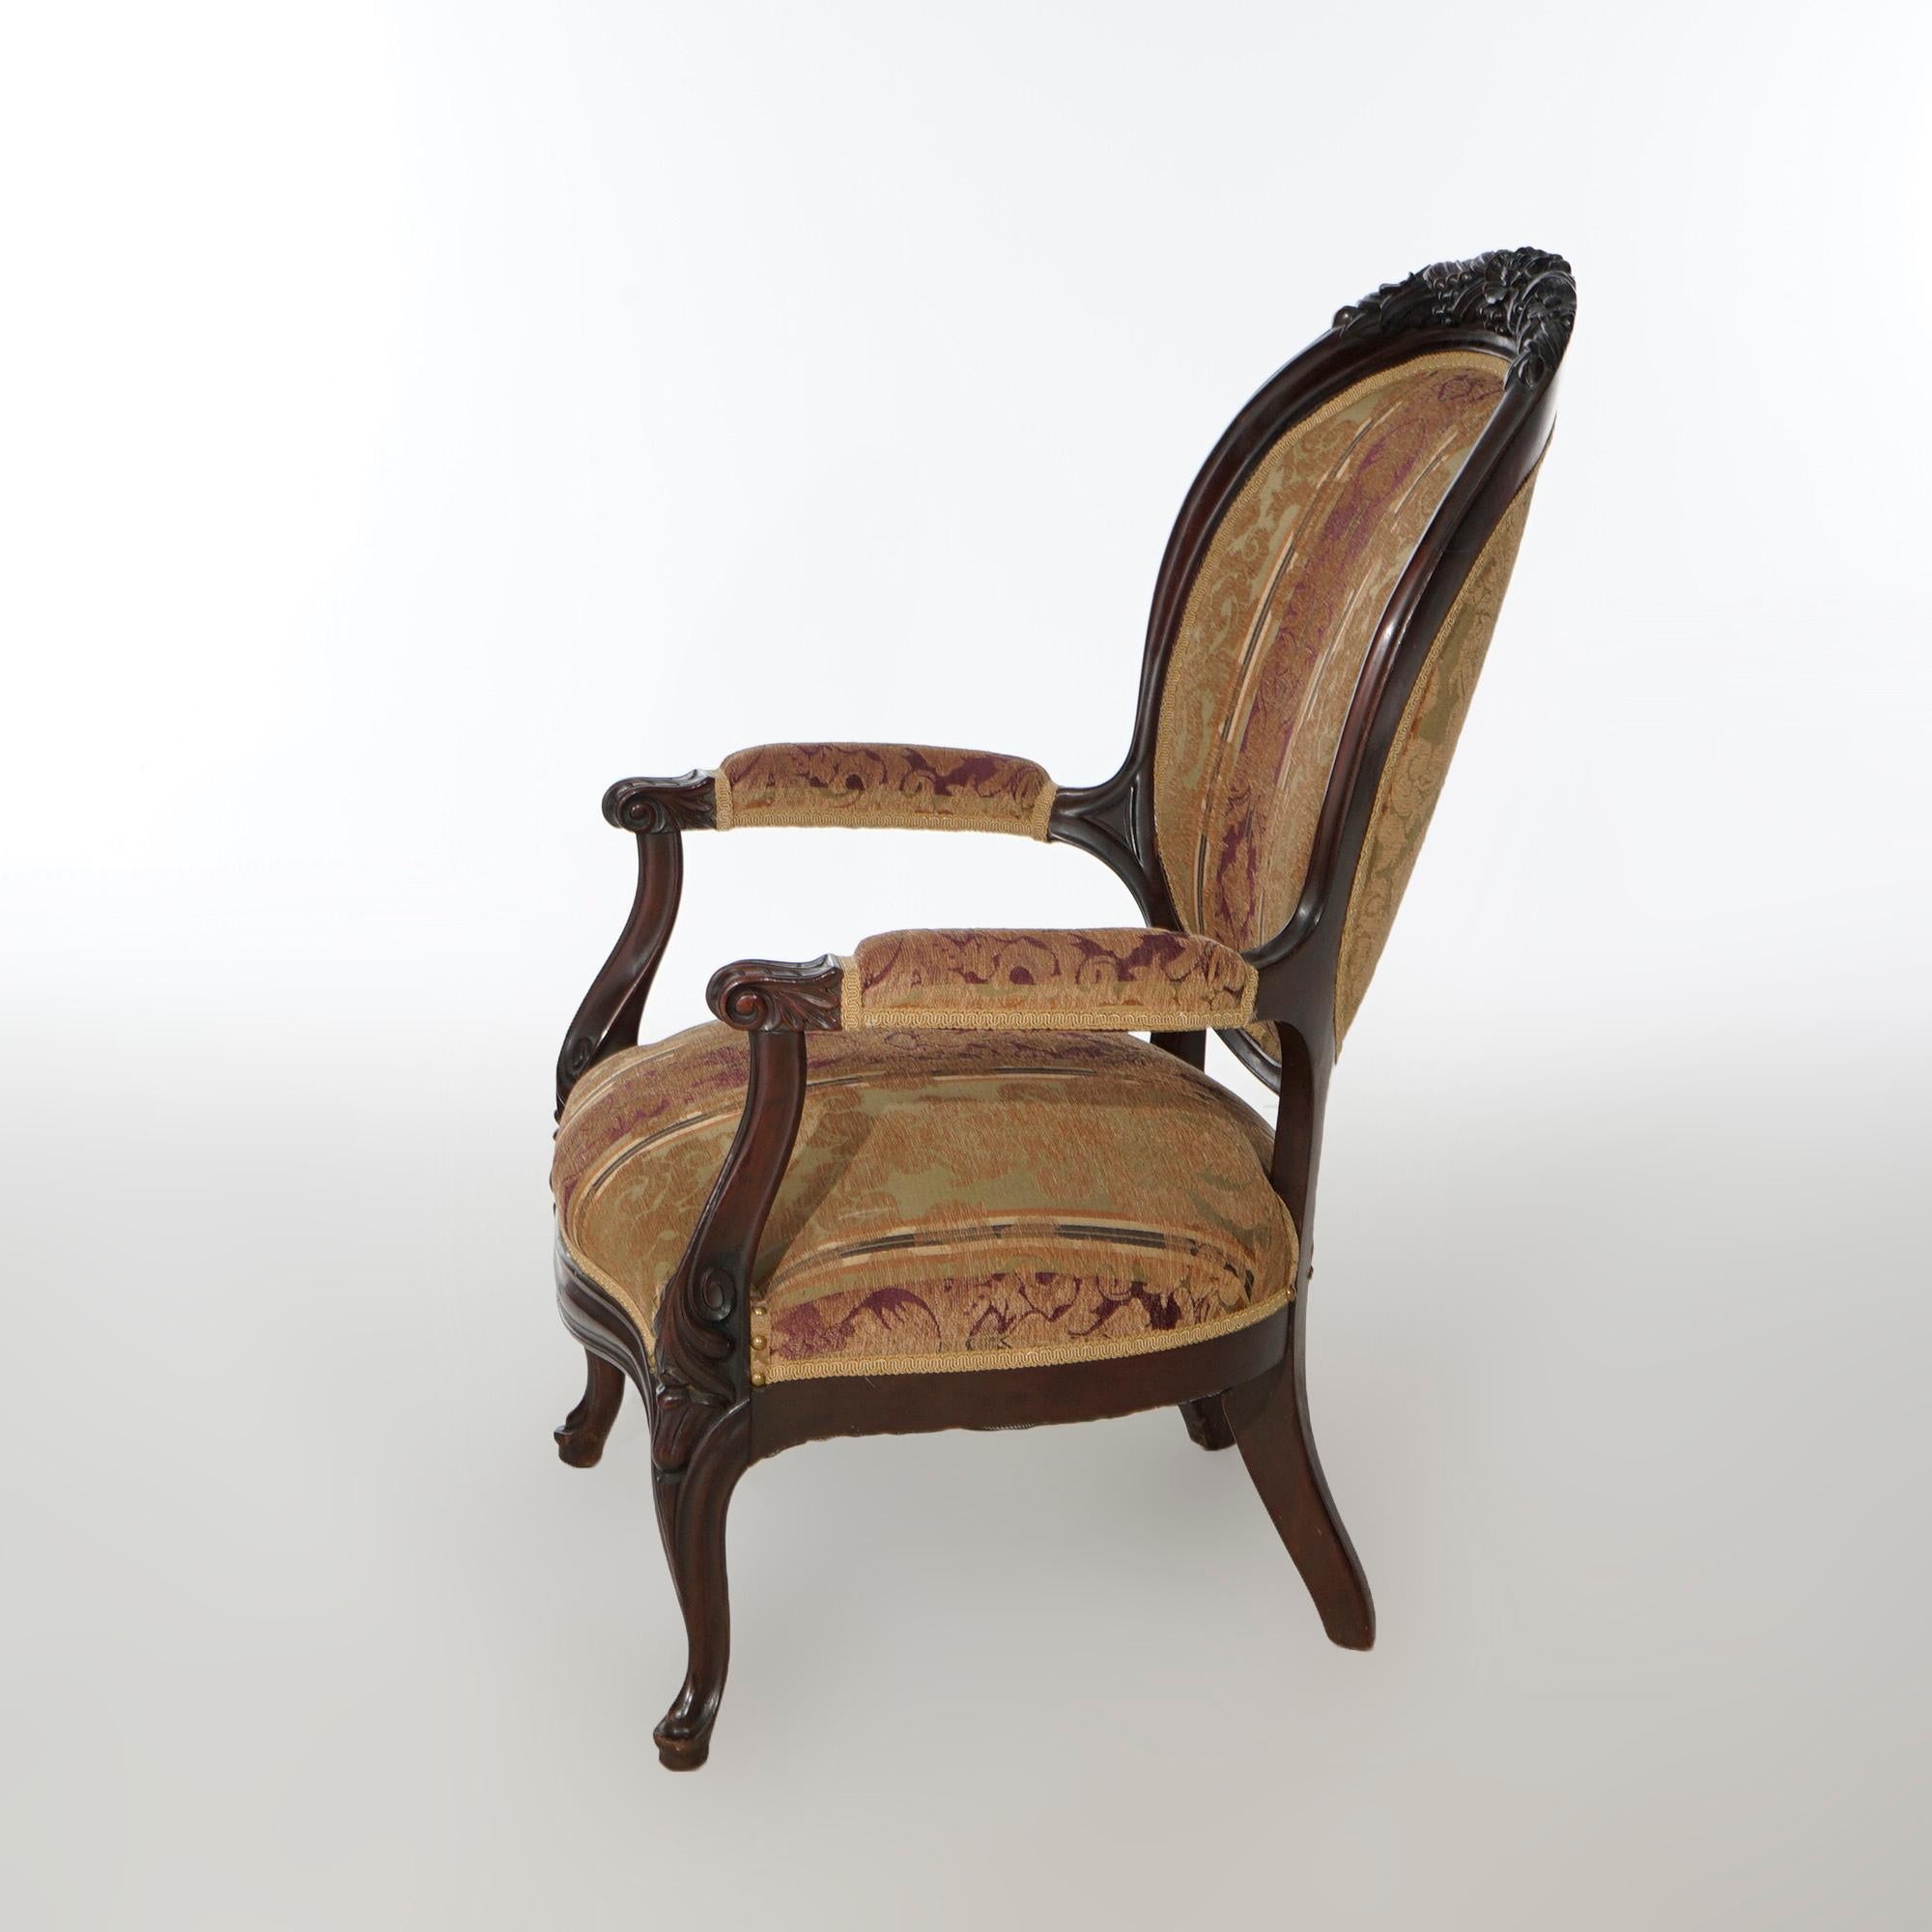 American Antique Victorian Carved Walnut Upholstered Parlor Arm Chair Circa 1890 For Sale